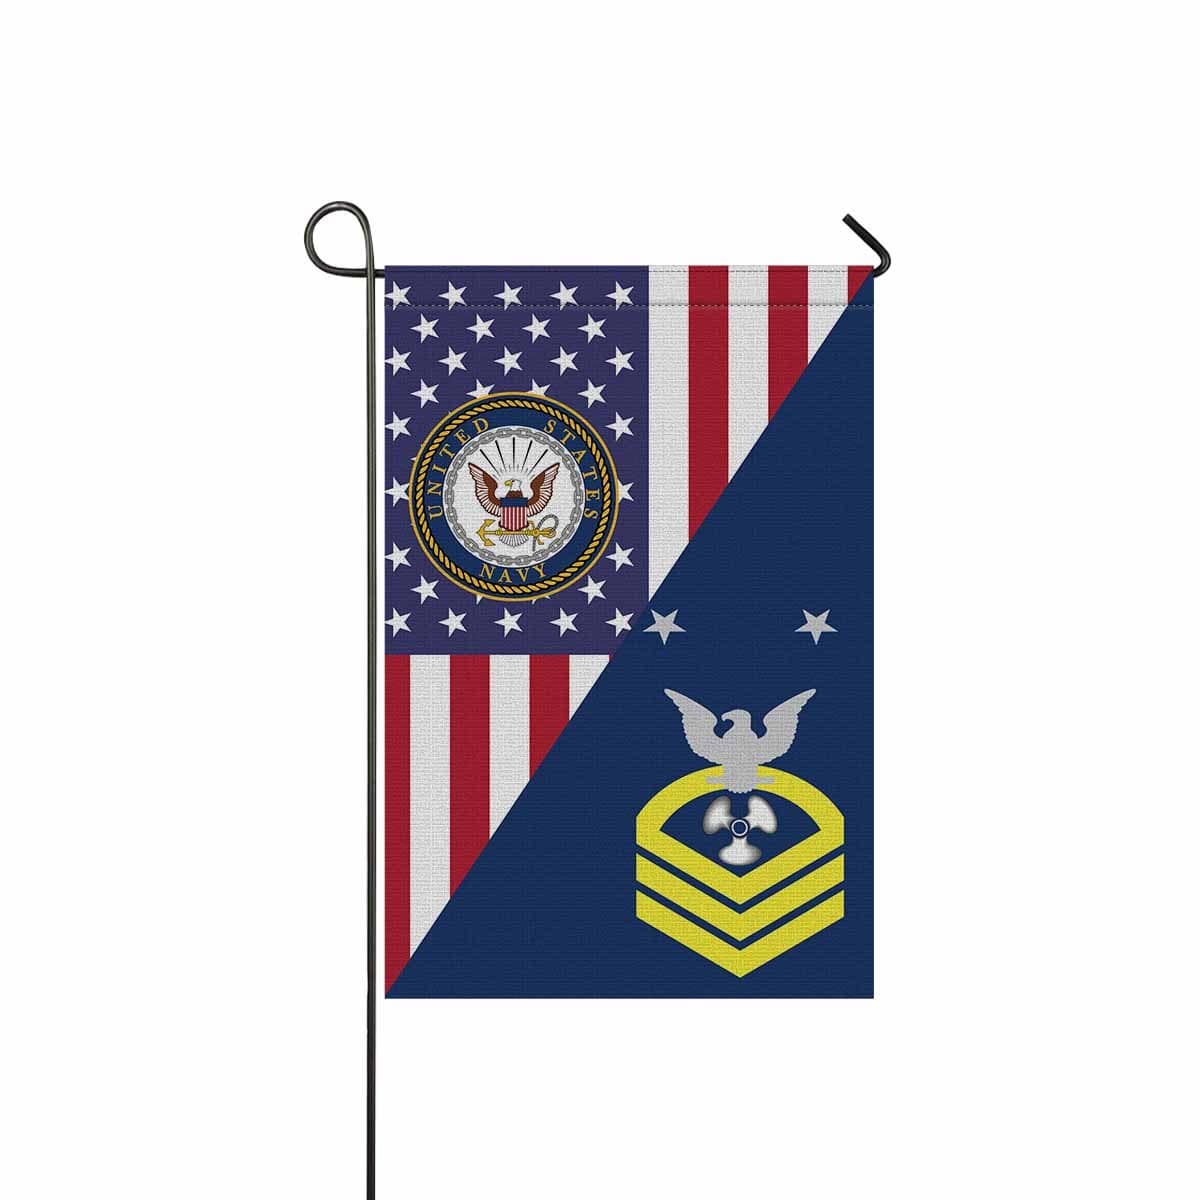 US Navy Machinist's Mate Navy MM E-9 MCPO Master Chief Petty Officer Garden Flag 12 Inches x 18 Inches Twin-Side Printingjpg-GDFlag-Navy-Rating-Veterans Nation